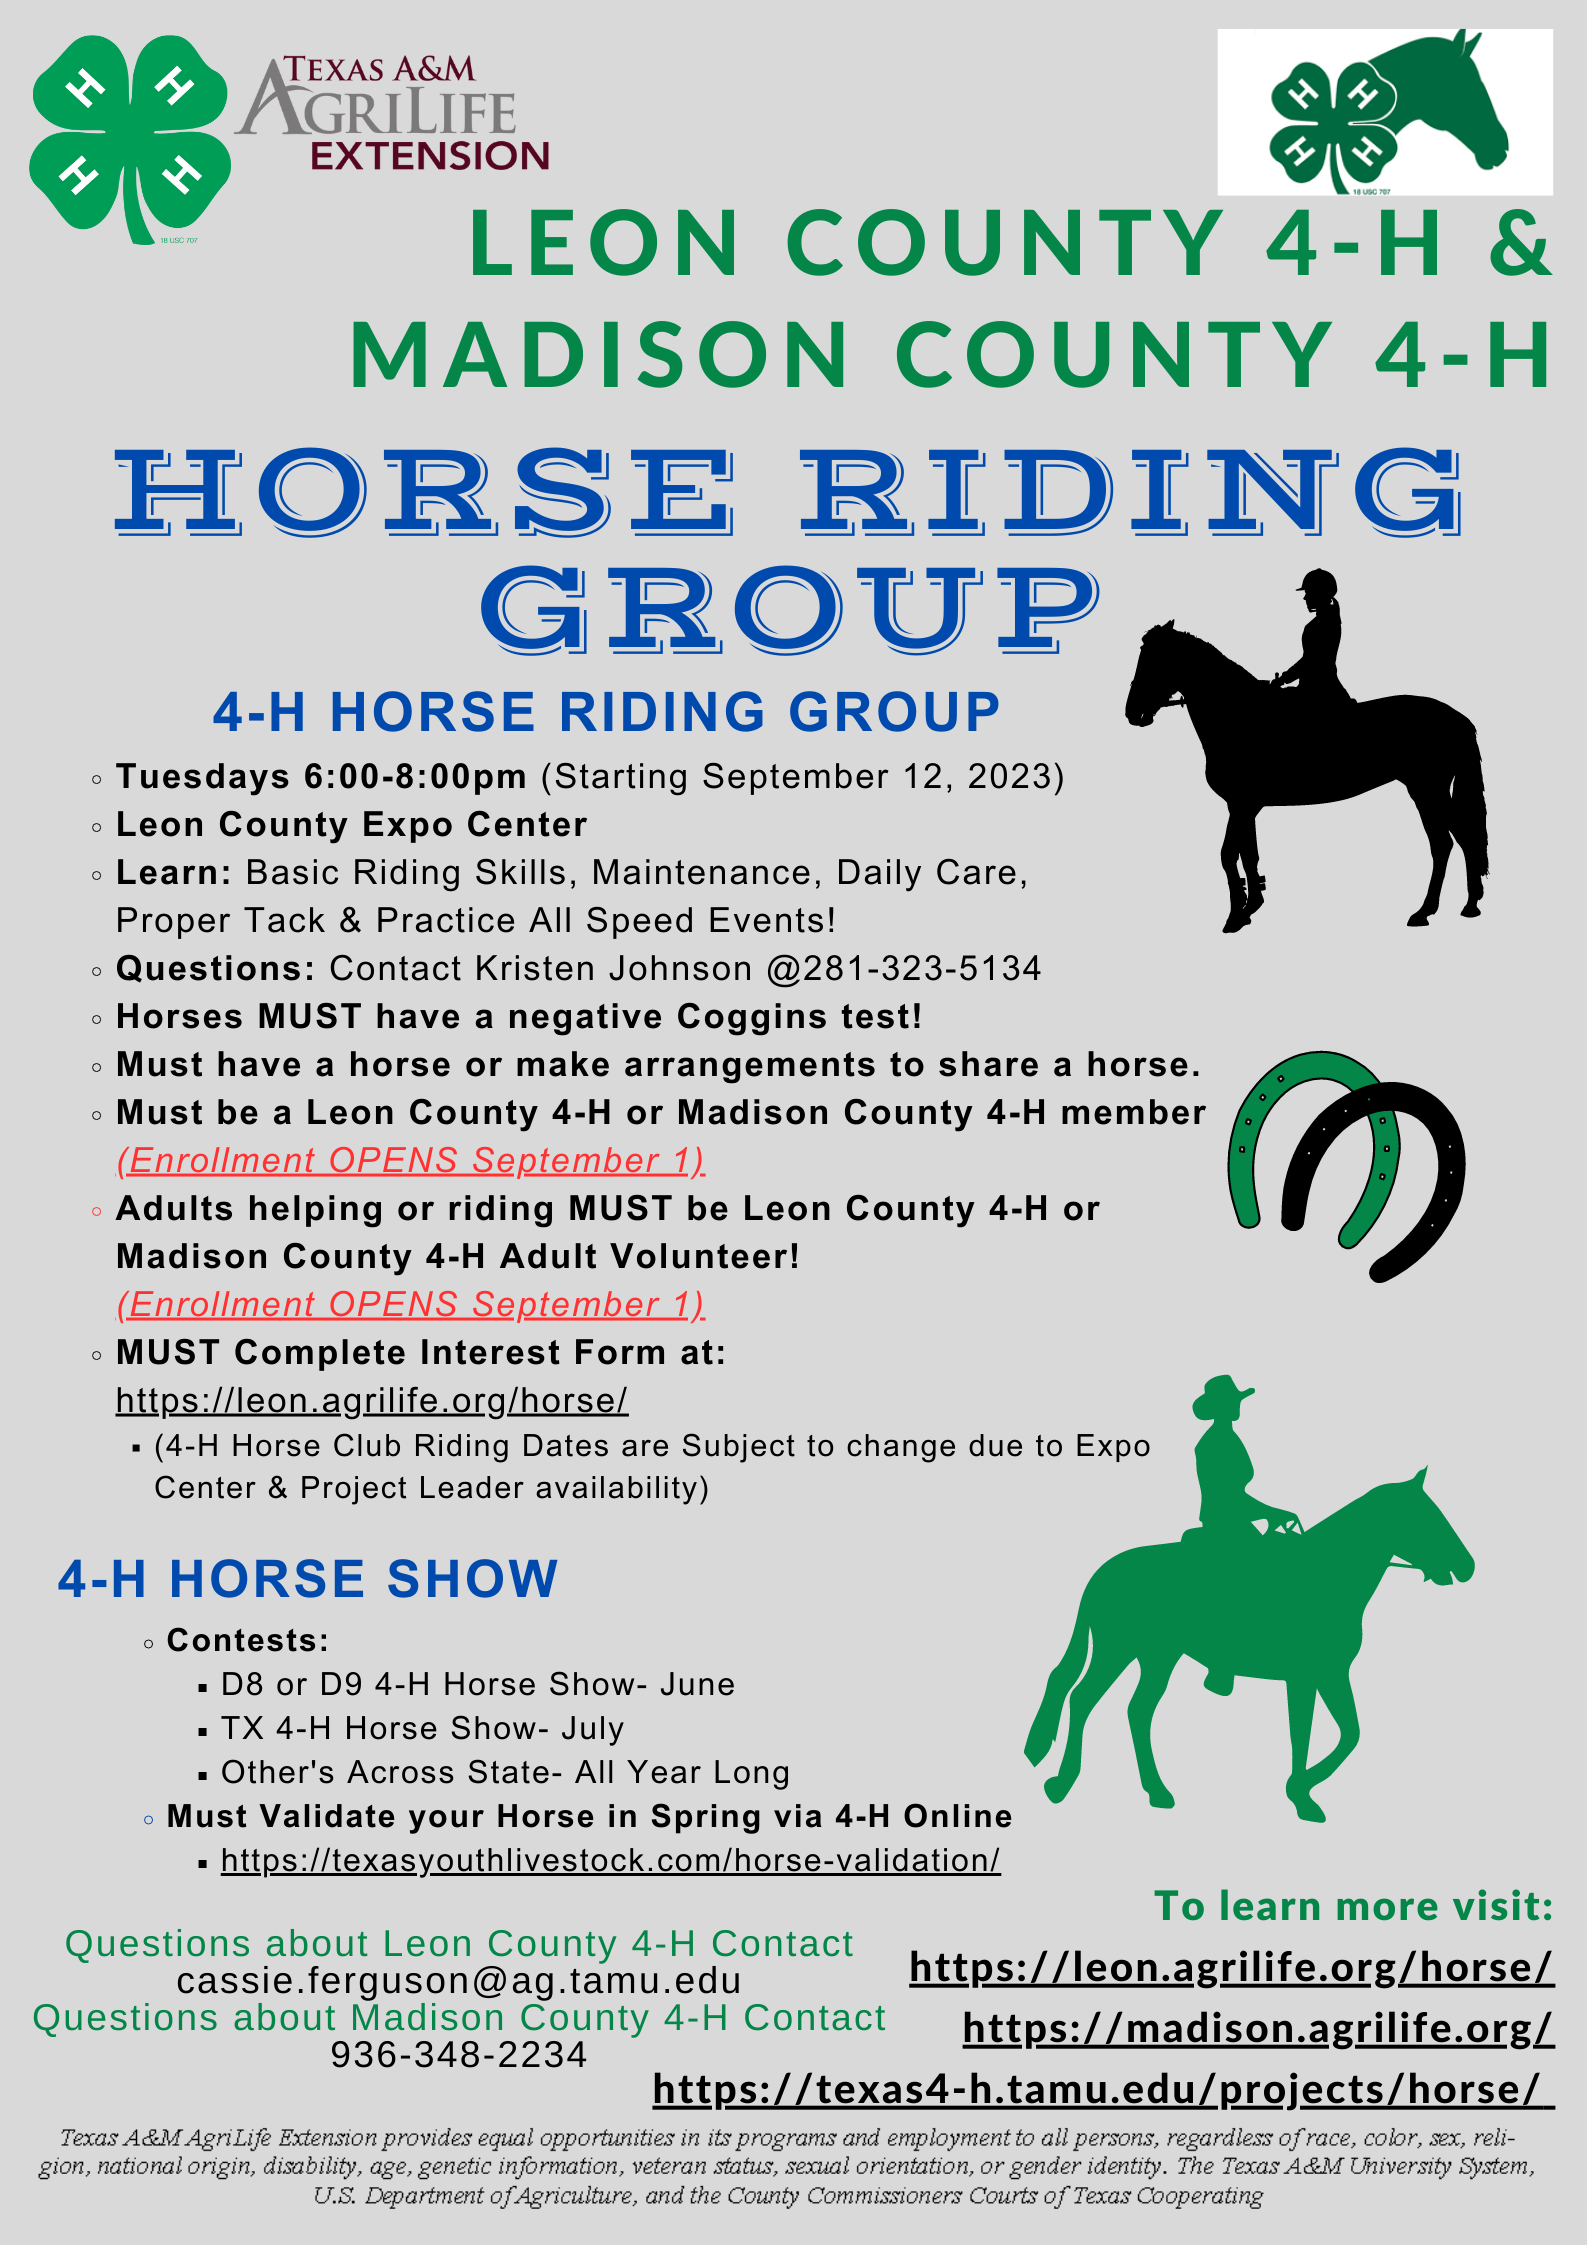 Leon Co. & Madison Co. 4-H Horse Riding Group Flyer 2023-2024 (2)